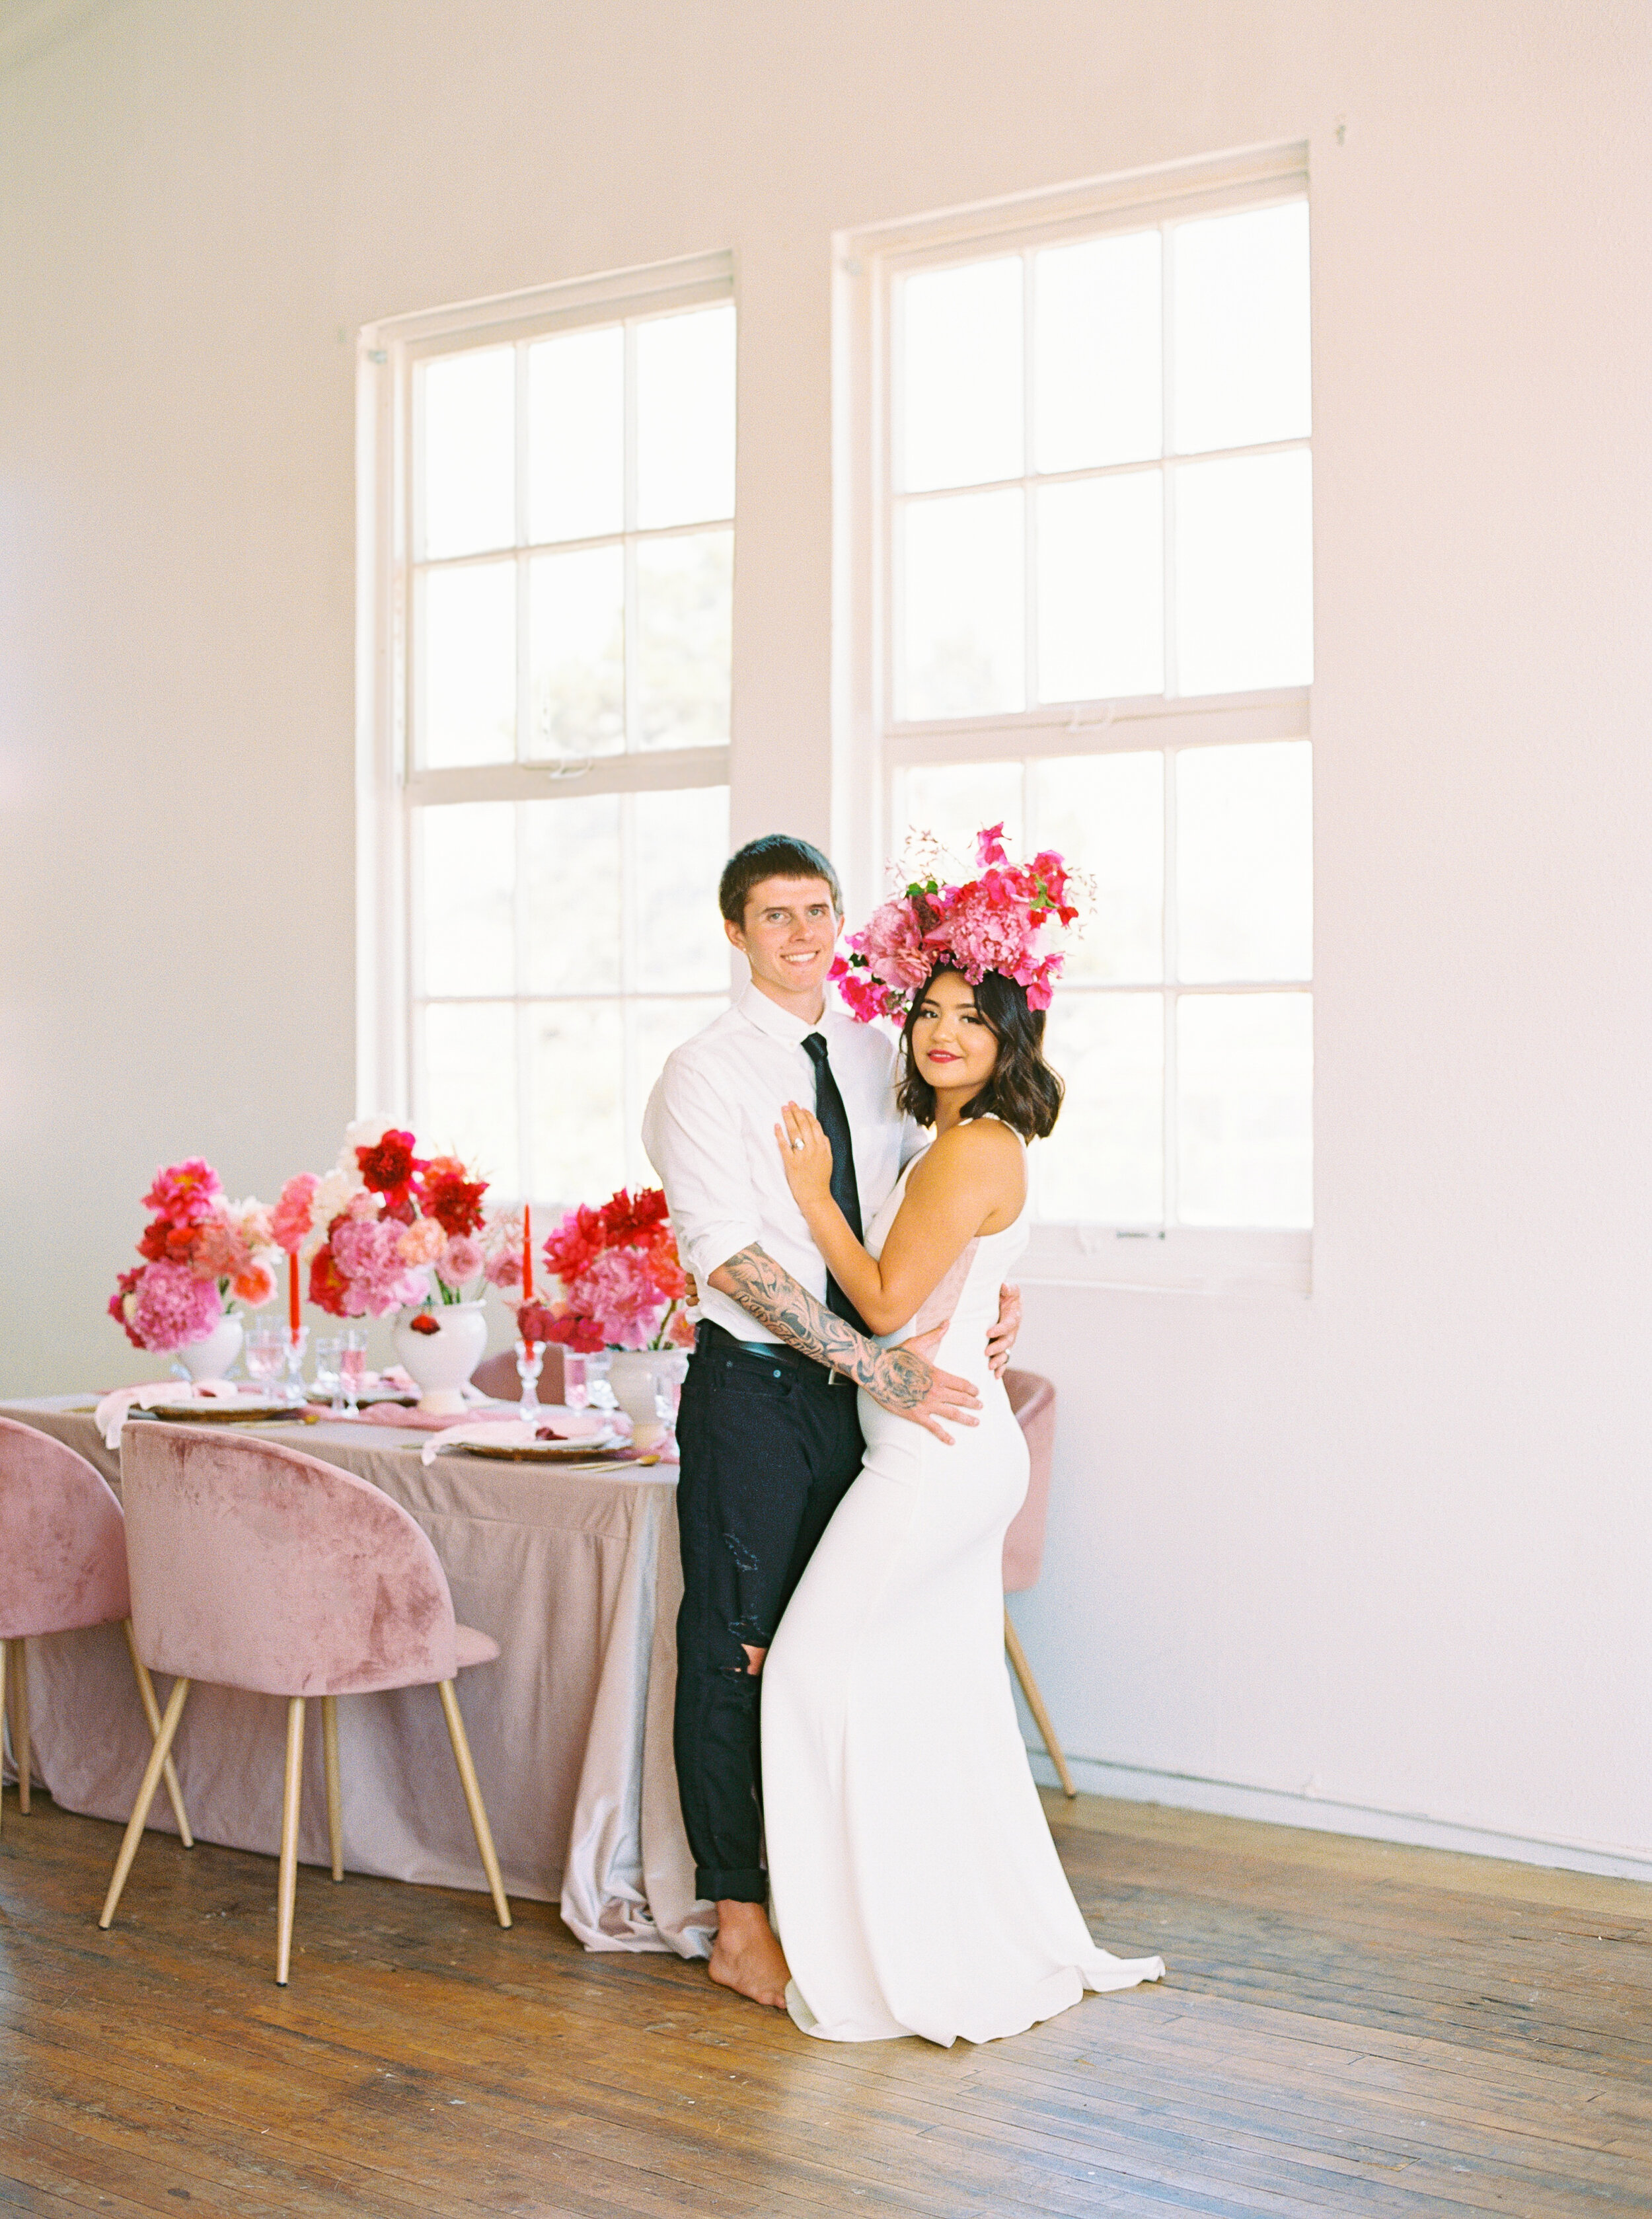 A Romantic Wedding Elopement Filled with Colorful Fuchsia - Sarahi Hadden Submission-62.jpg